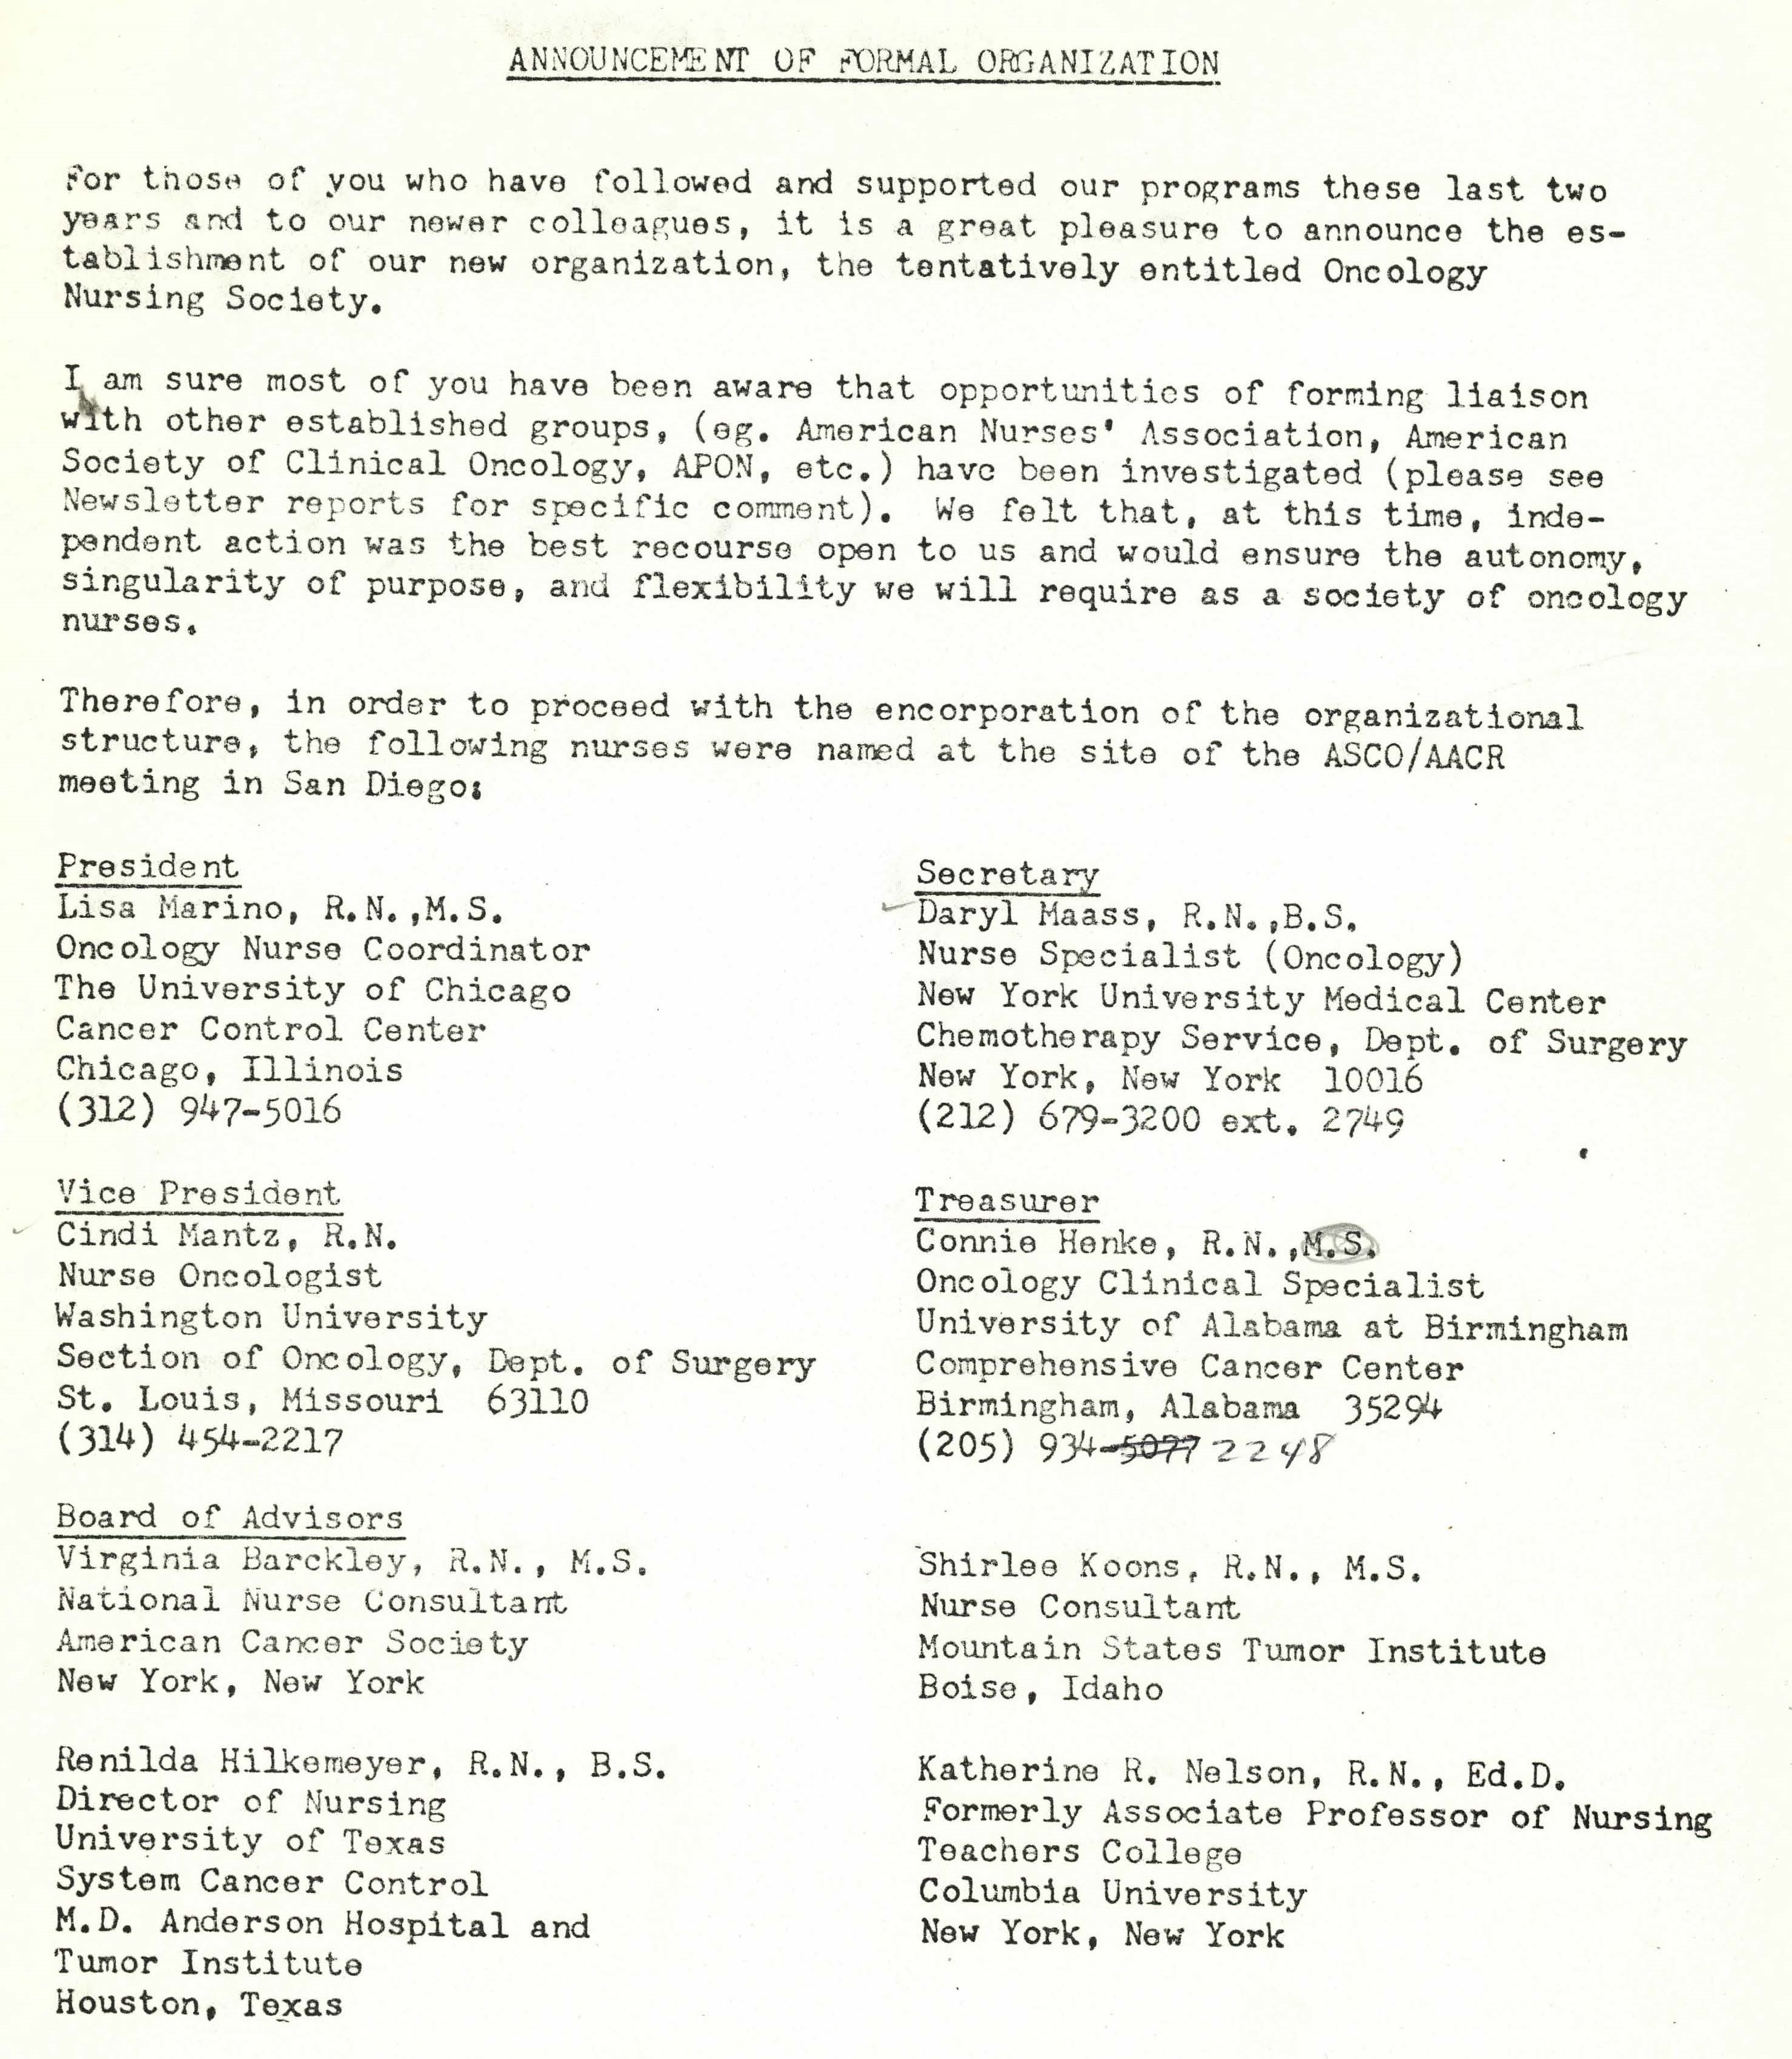 Scanned image of document with typed text that announces the formalization of ONS as an organization